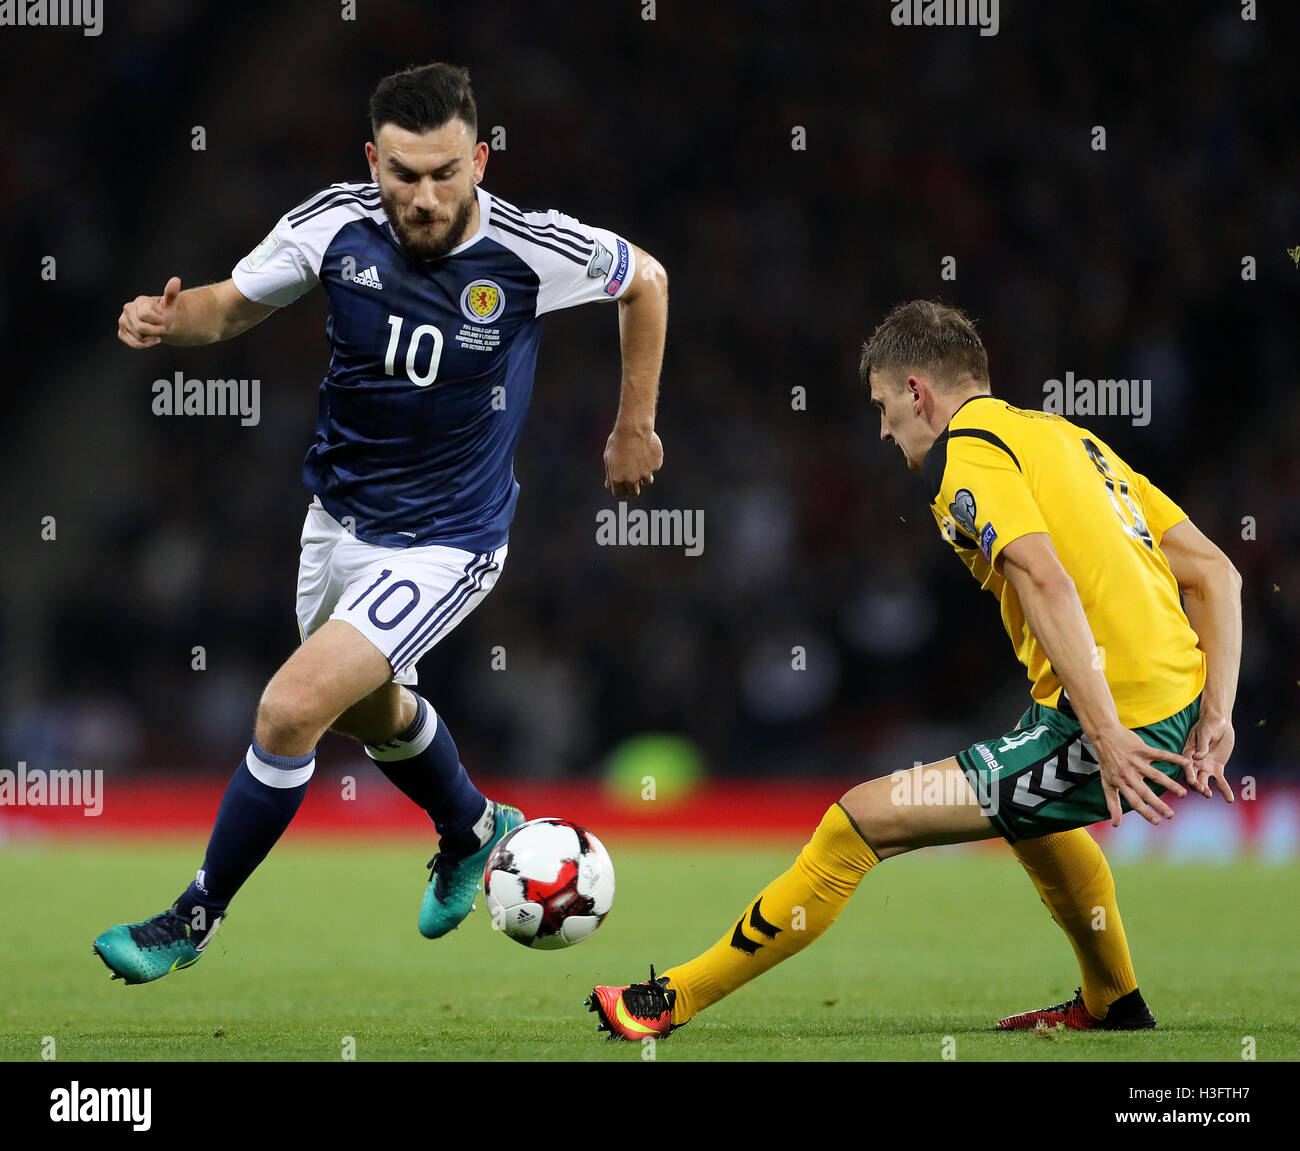 Scotland's Robert Snodgrass and Lithuania's Edvinas Girdvainis battle for the ball during the 2018 FIFA World Cup Qualifying match at Hampden Park, Glasgow. Stock Photo